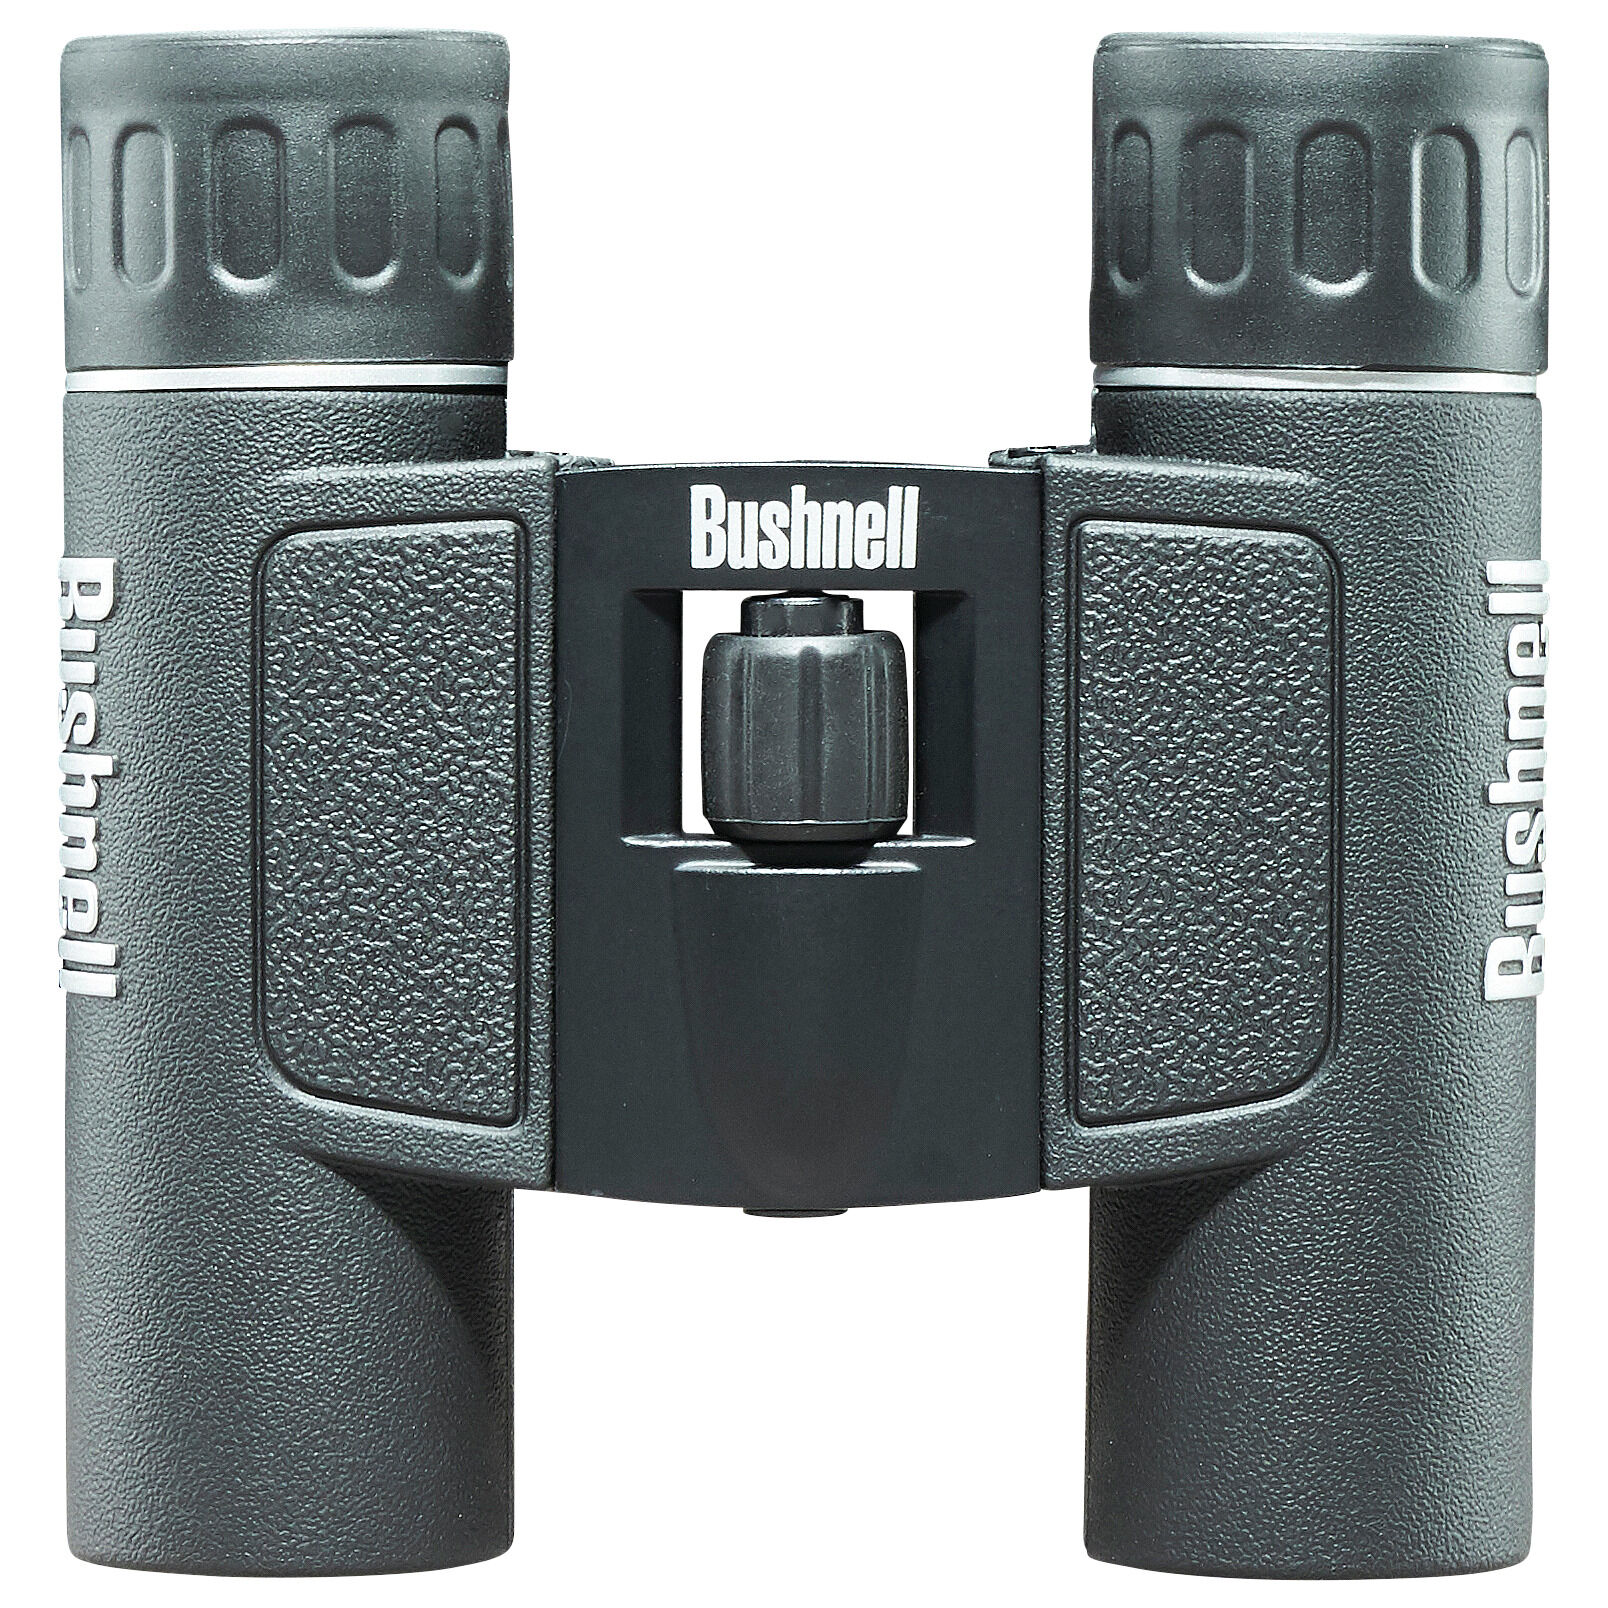 Bushnell Fernglas PowerView 12x25 